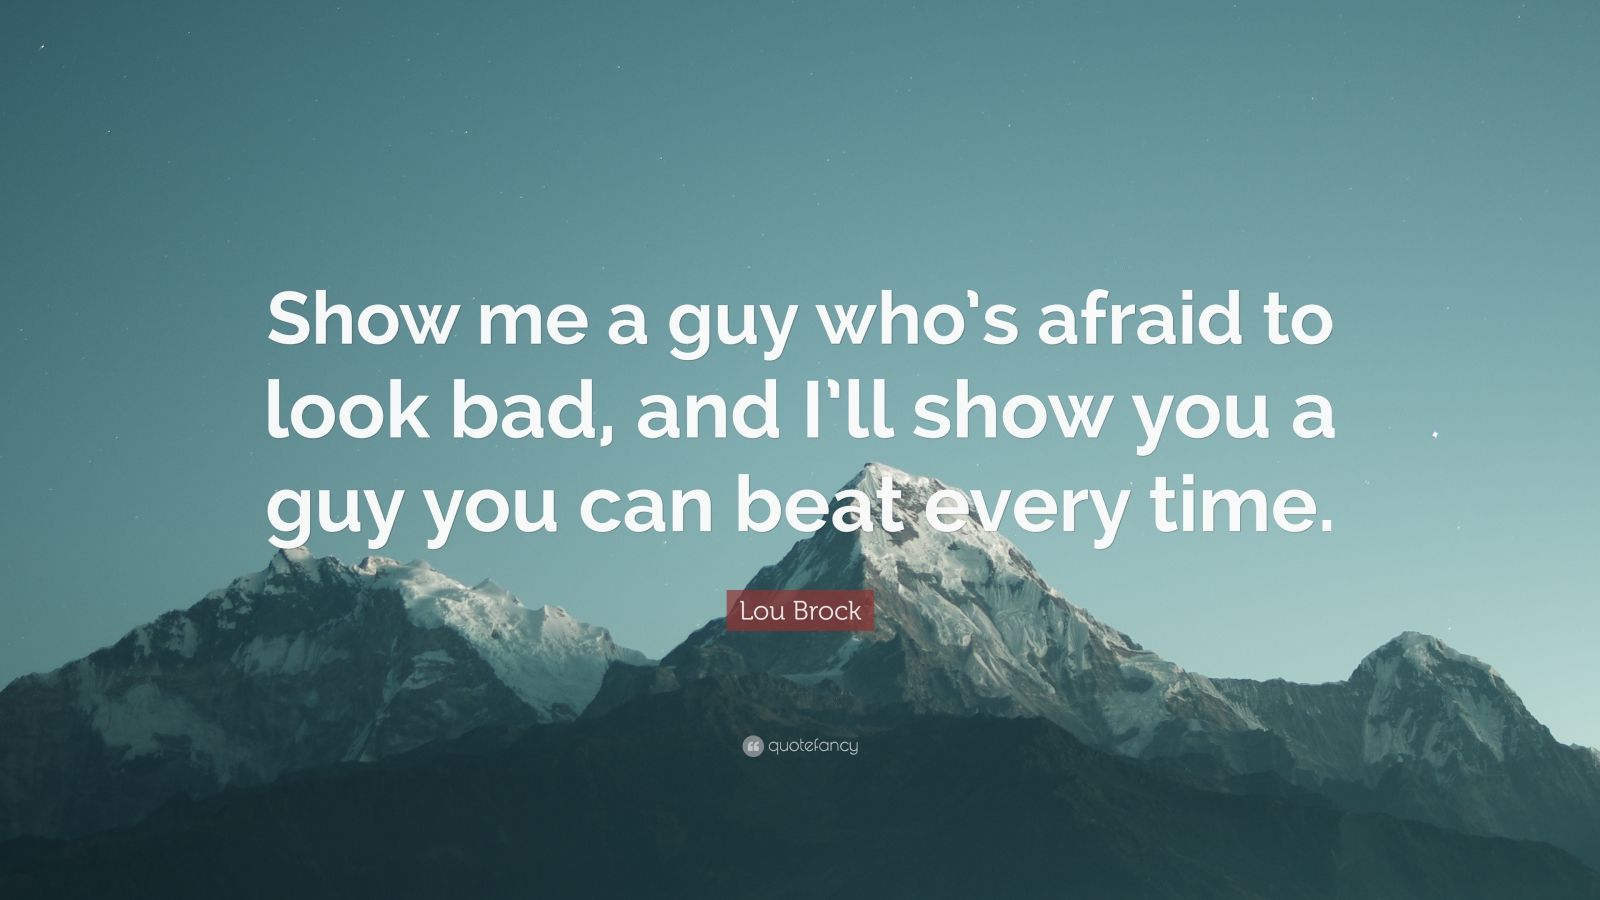 PLR Wallpapers - Show Me A Guy Who's Afraid To Look Bad, And I'll